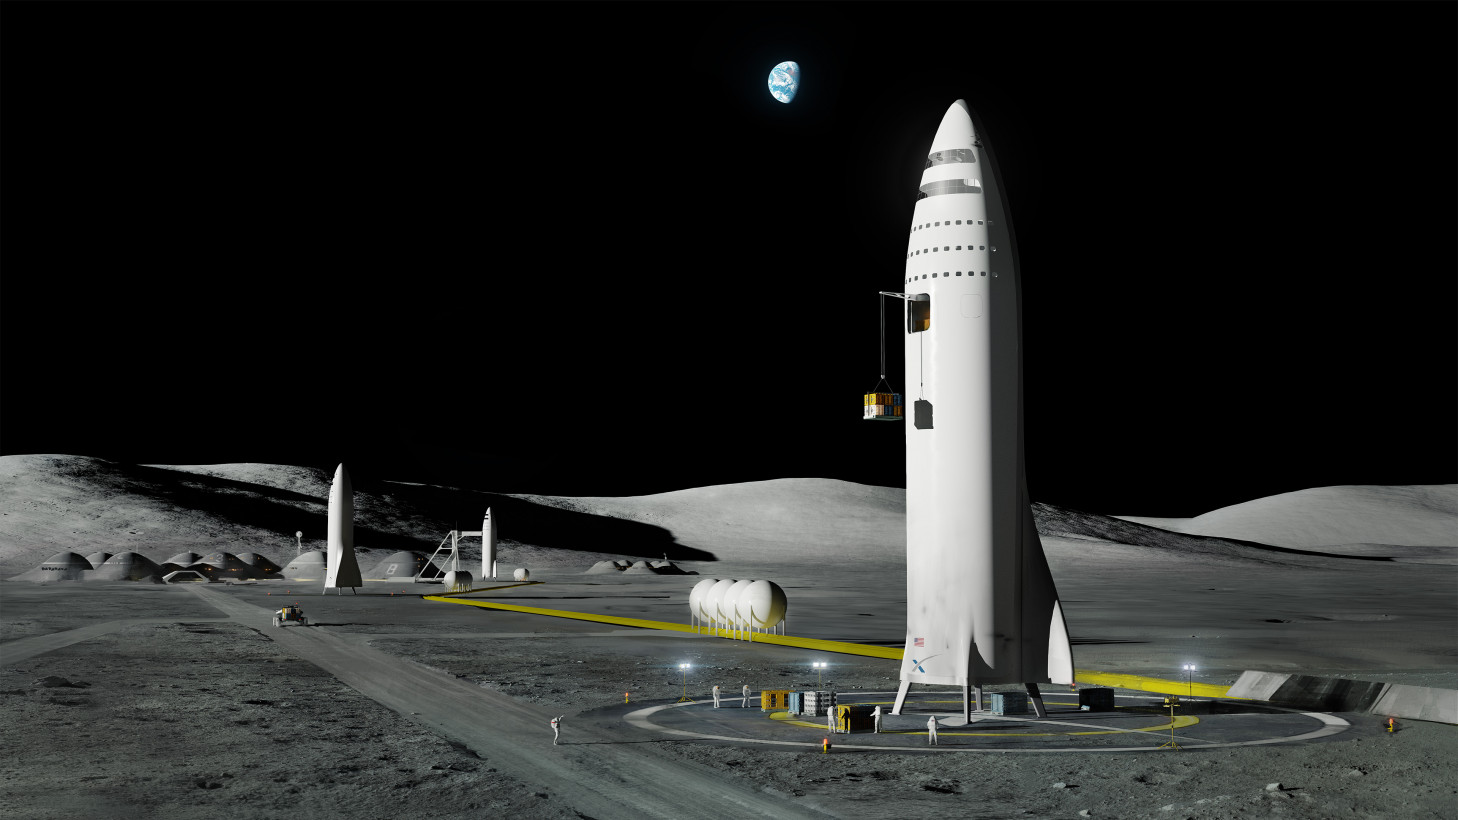 An artist's impression of SpaceX's BFR rocket on the moon